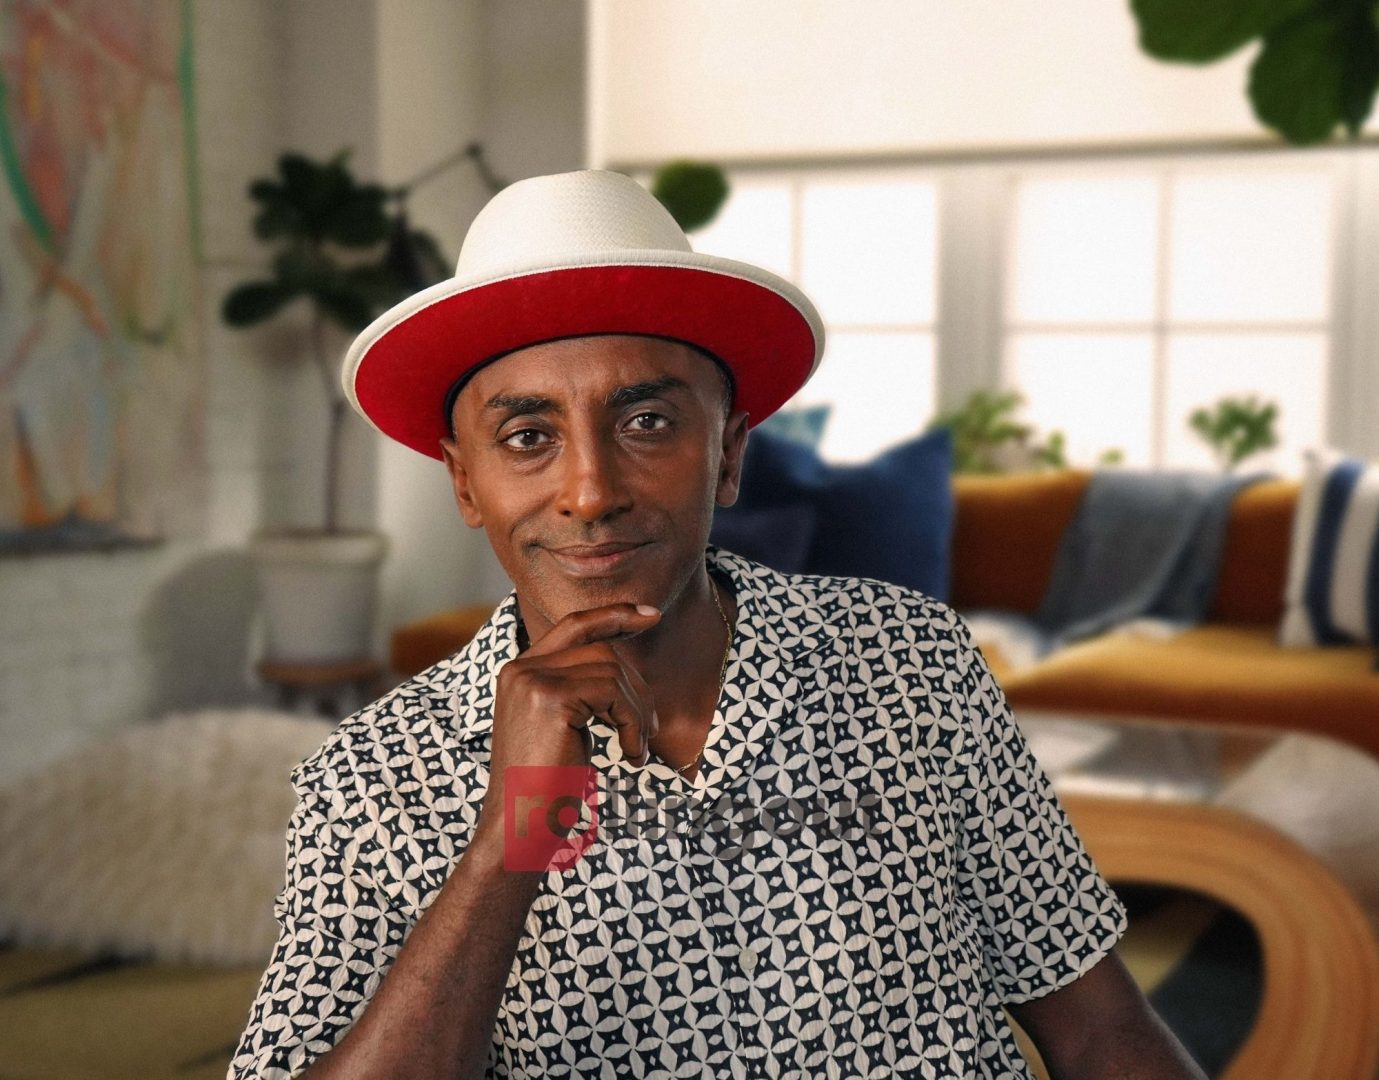 Restaurateur and chef Marcus Samuelsson continues to serve up plates of love